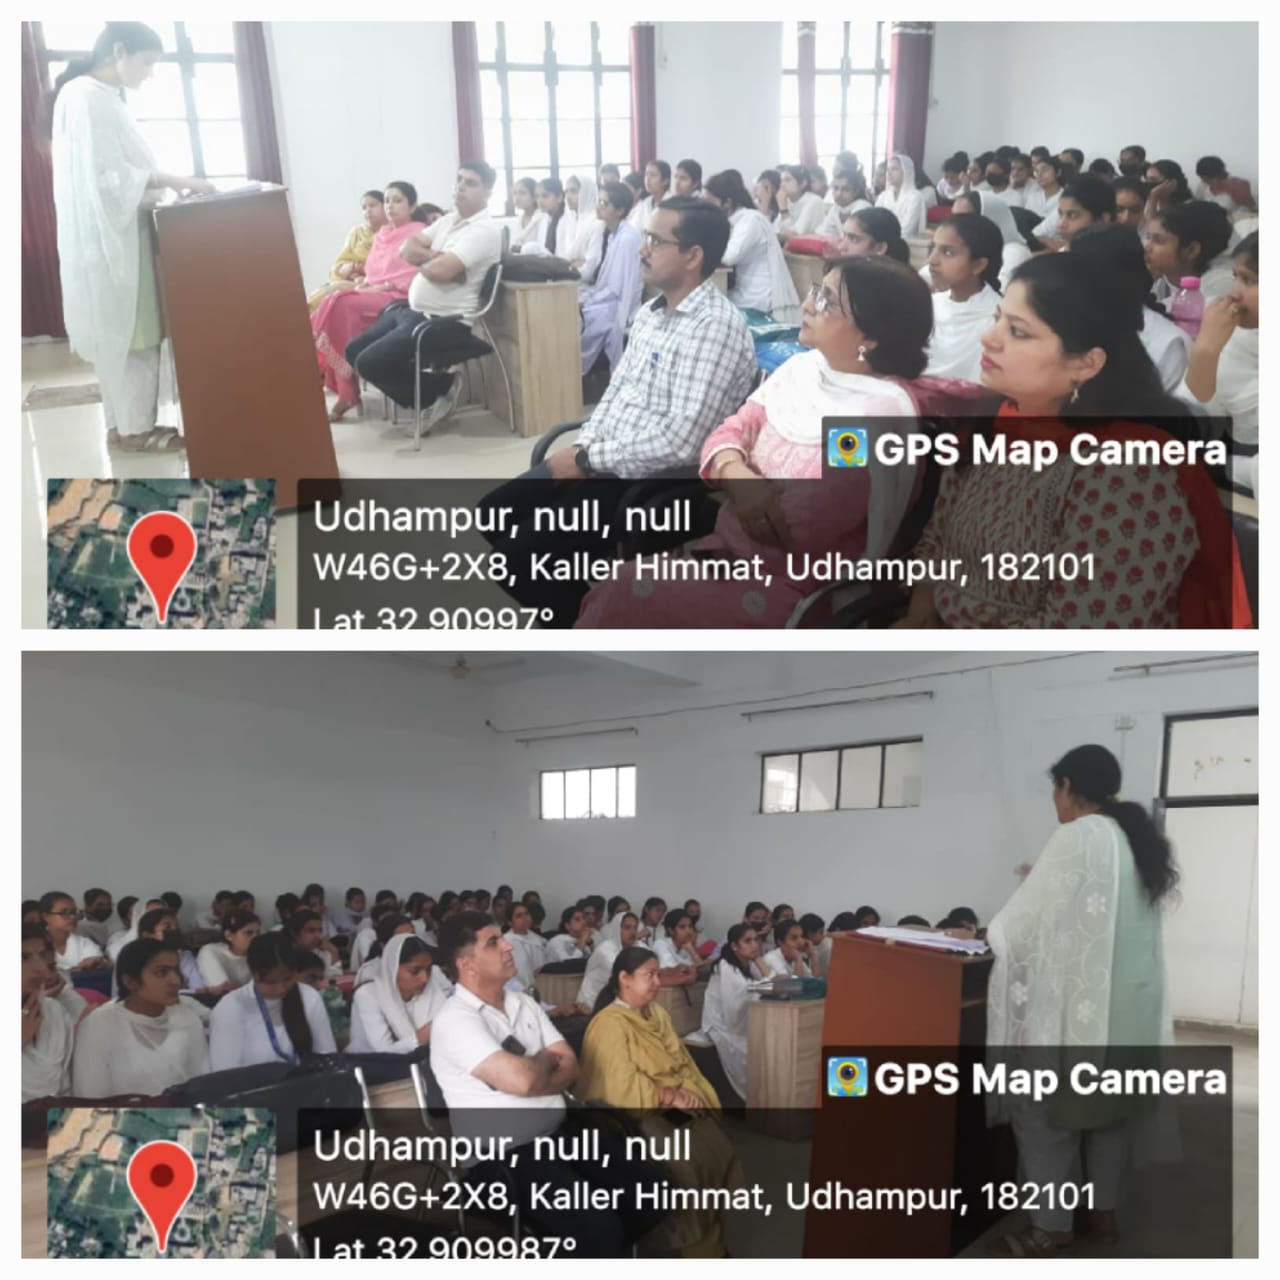 GCW UDHAMPUR ORGANIZES AN AWARENESS LECTURE ON CYBER LAW: NEED AND IMPORTANCE